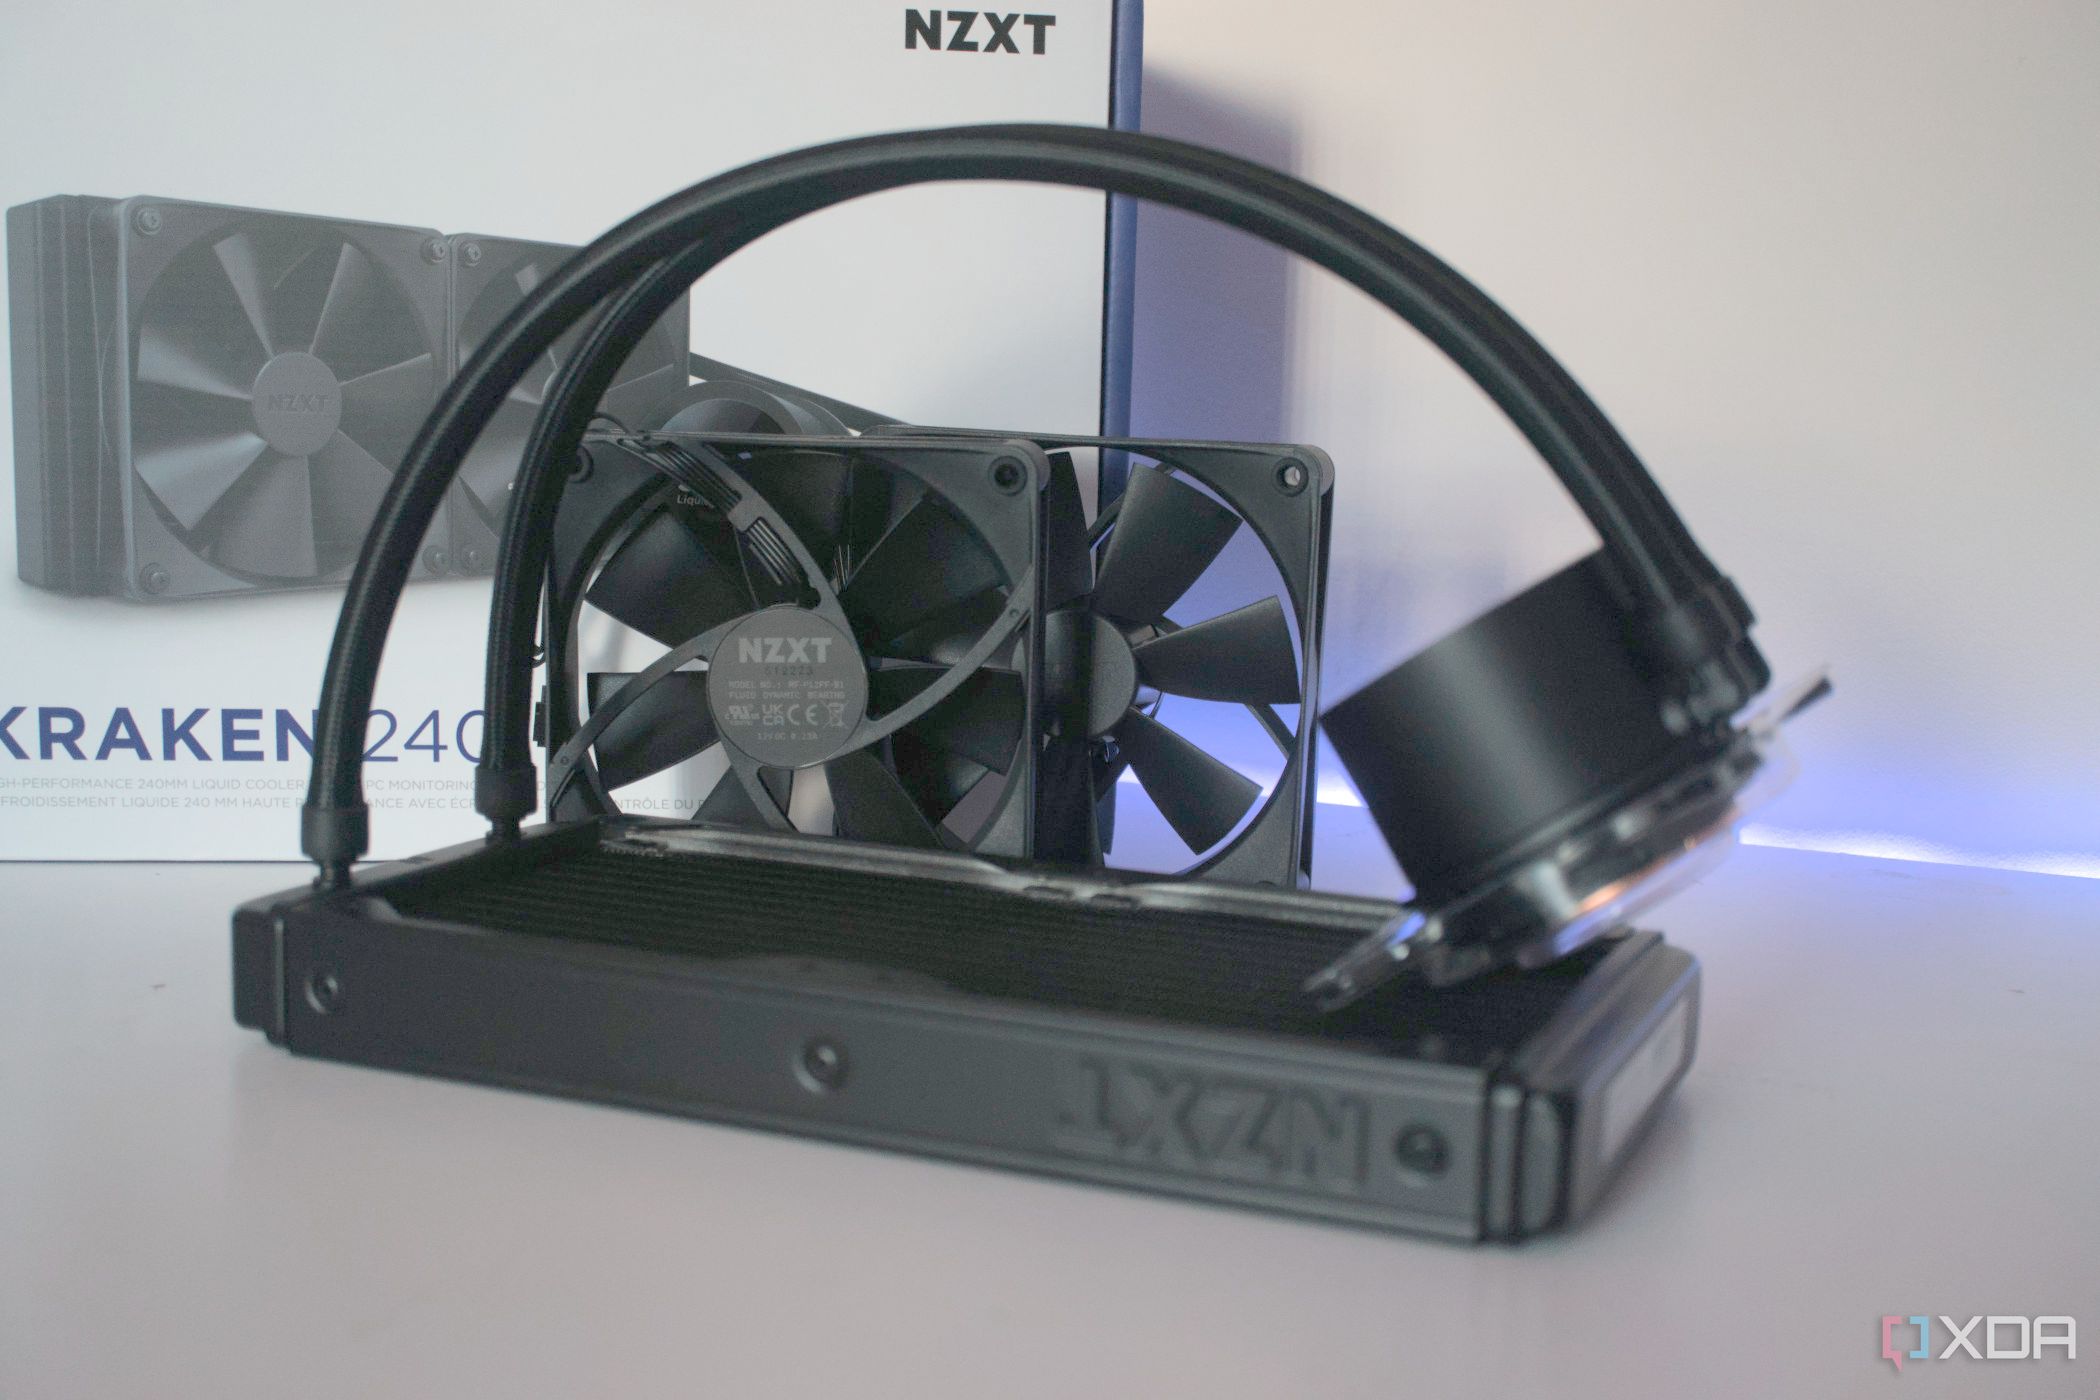 Impressive performance 240 review: price at reasonable NZXT a cooling Kraken